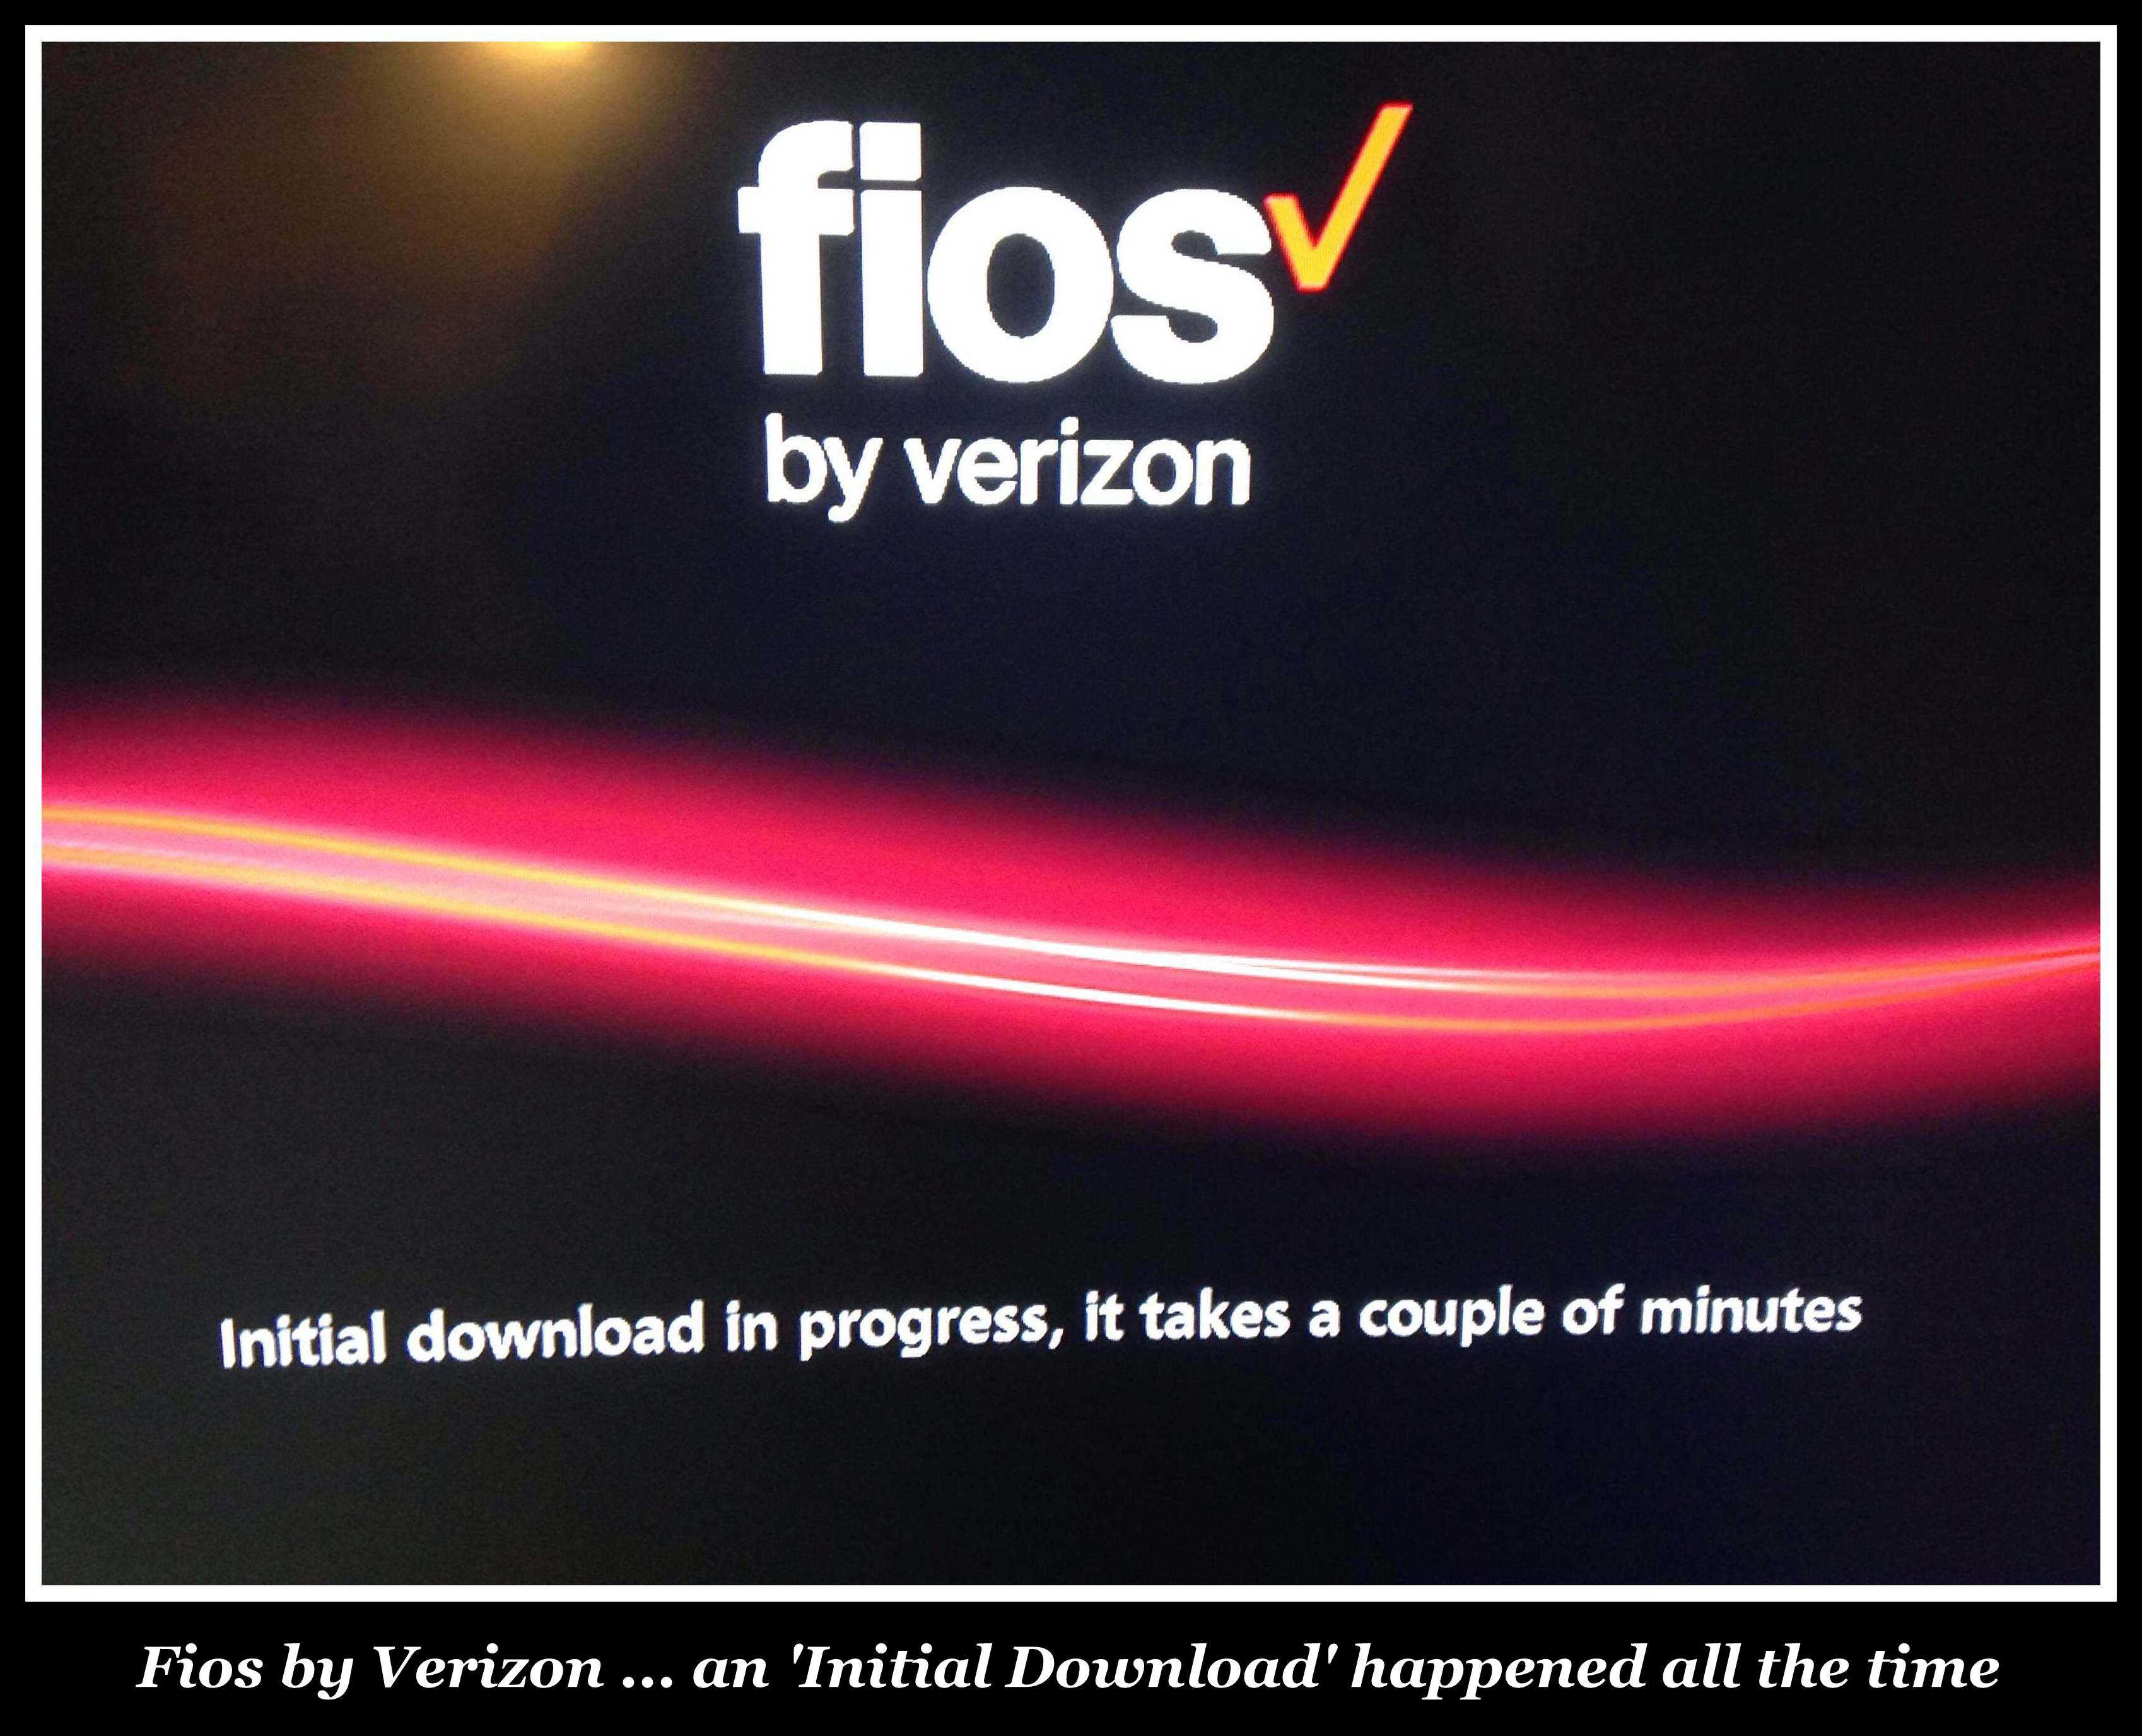 #Fios by Verizon, initial download drove us nuts